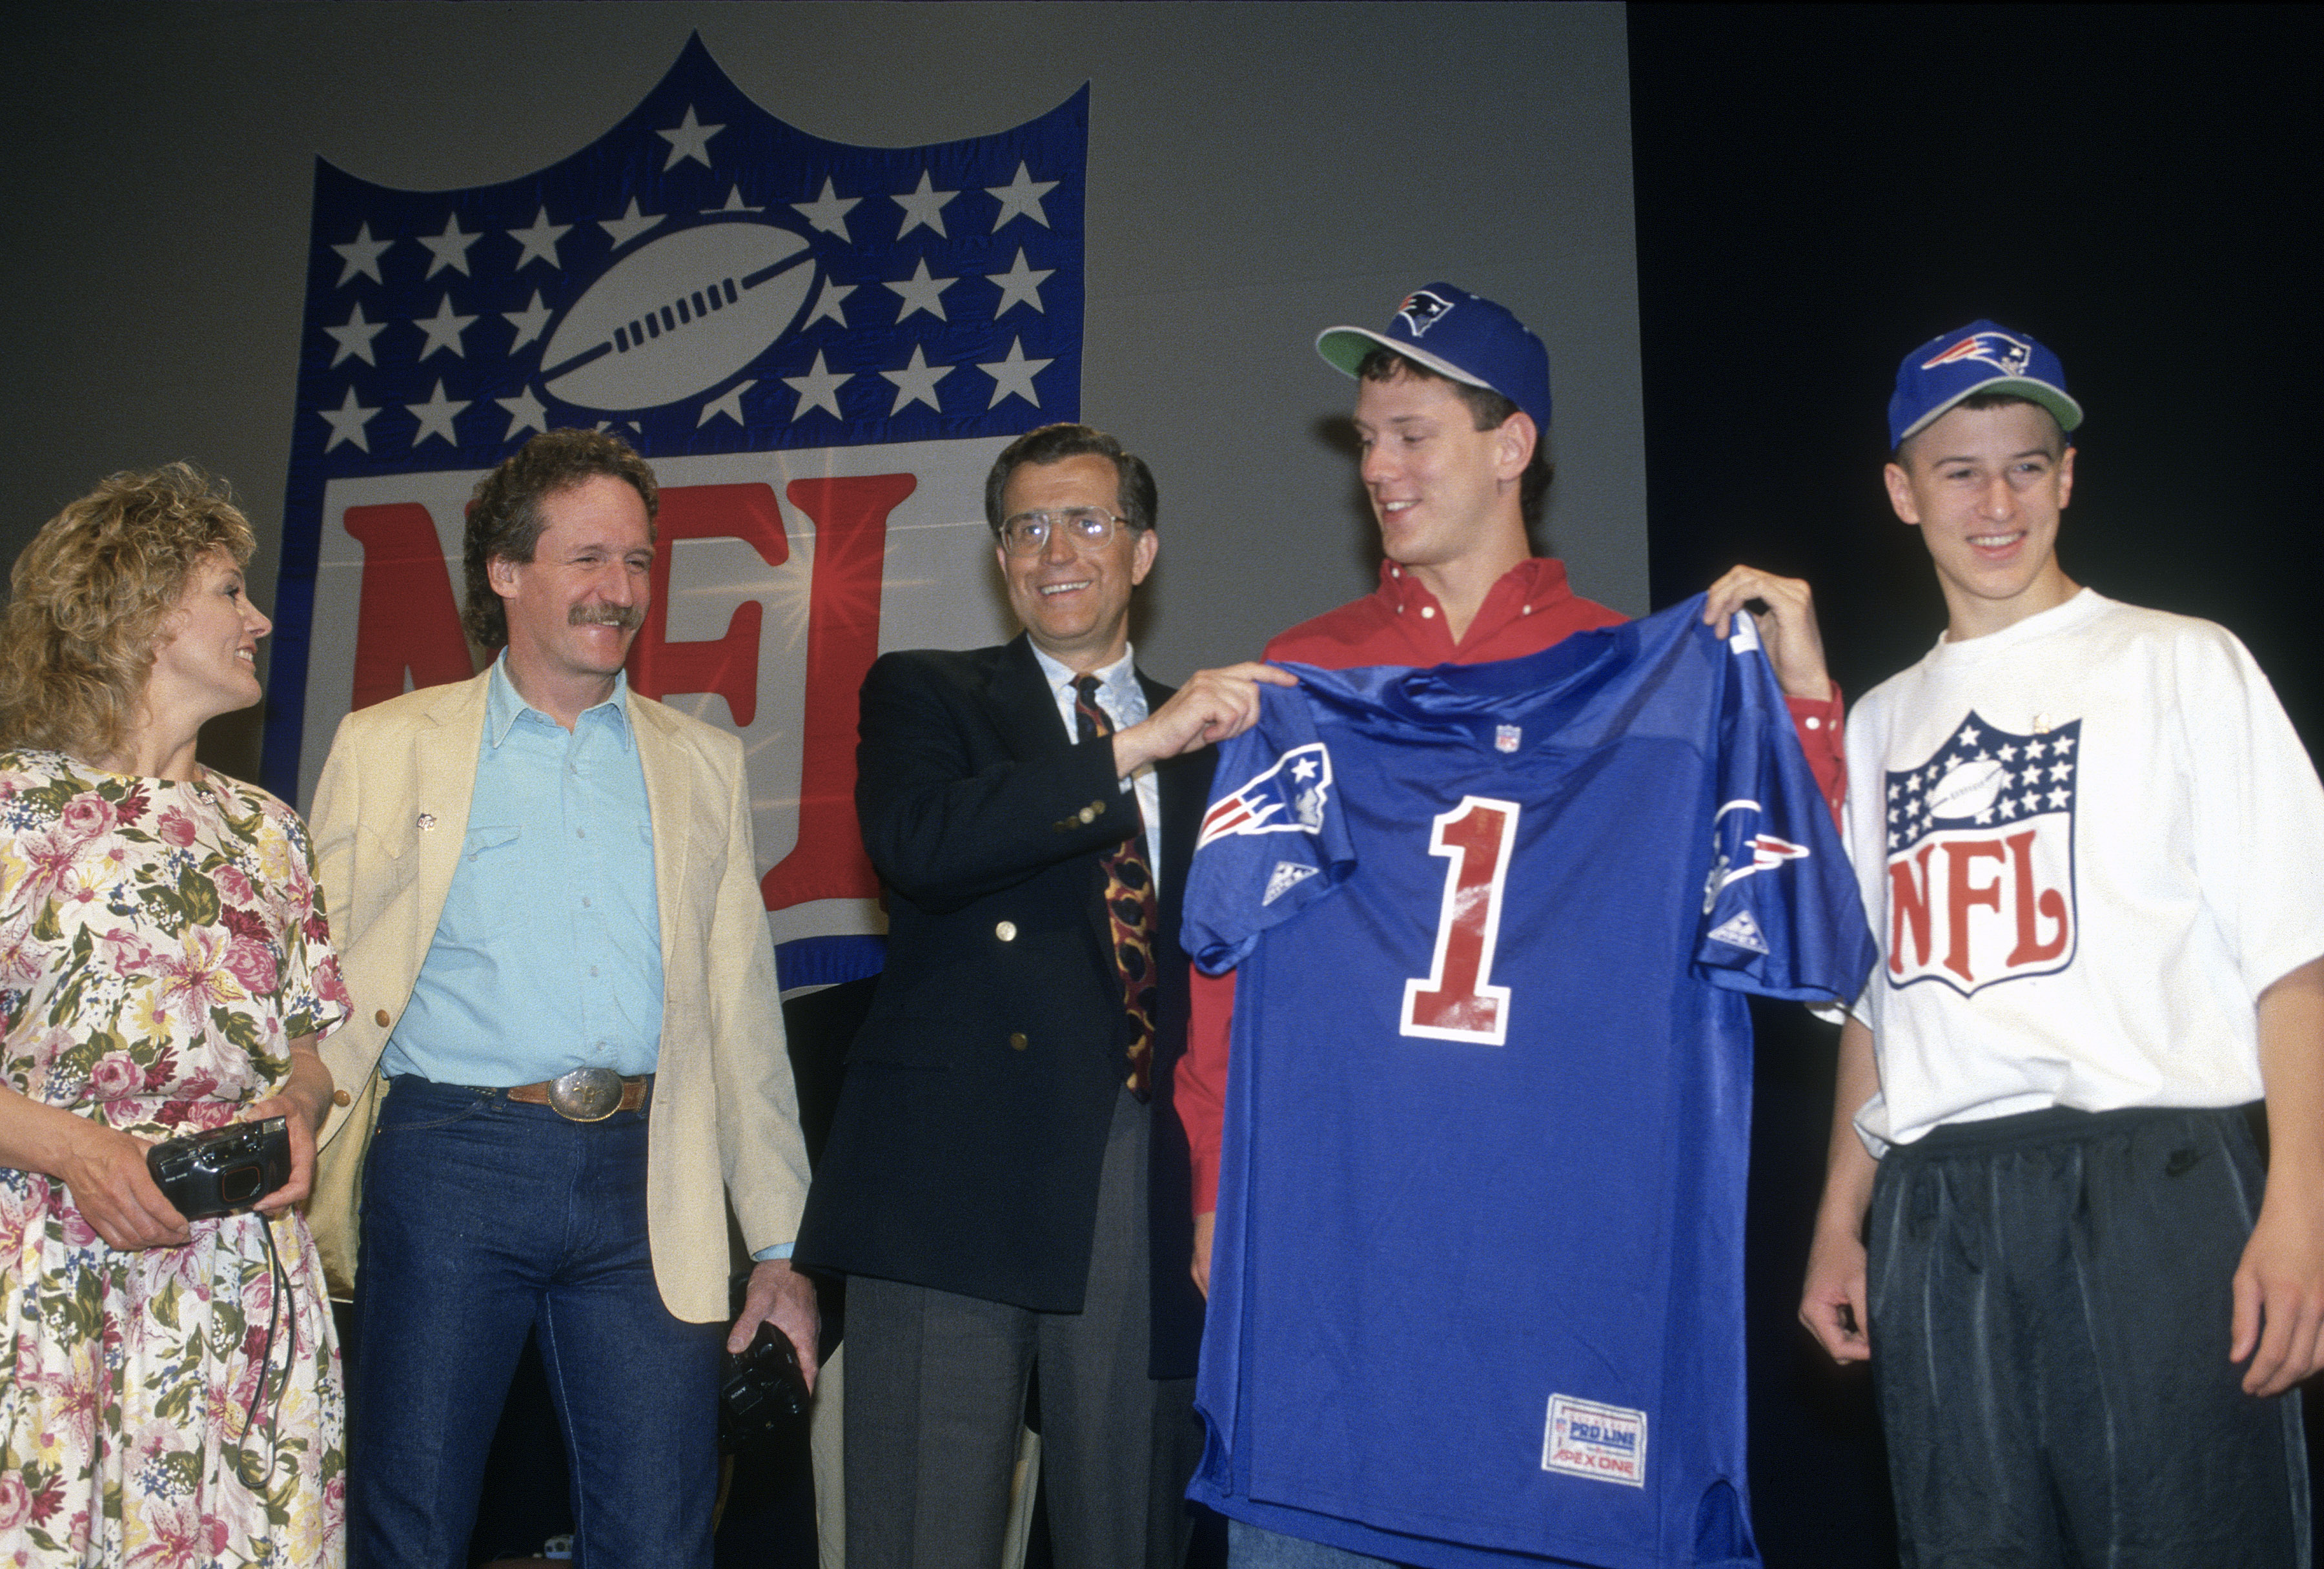 NFL Commissioner Paul Tagliabue stands with Drew Bledsoe, the No. 1 draft pick of the New England Patriots at the 1993 NFL draft